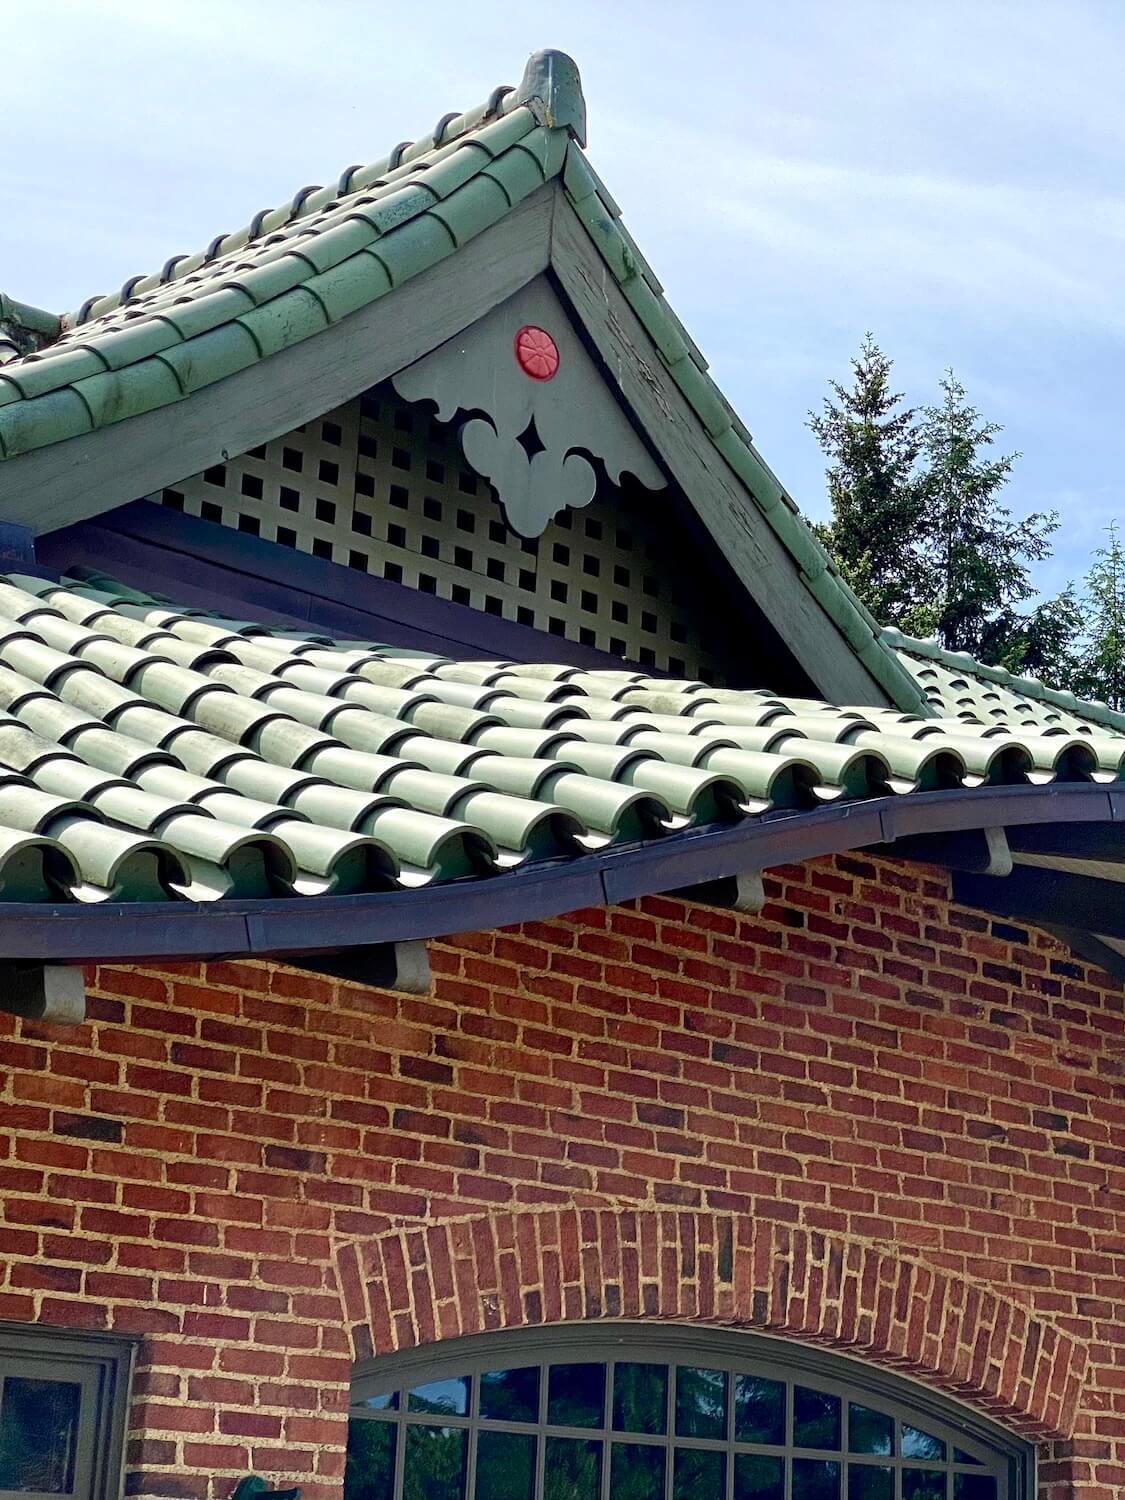 The pagoda at the Japanese Garden at Point Defiance Park in Tacoma, Washington has an ornate roofline with green curved tile while the face of the building holds historic looking red brick.  